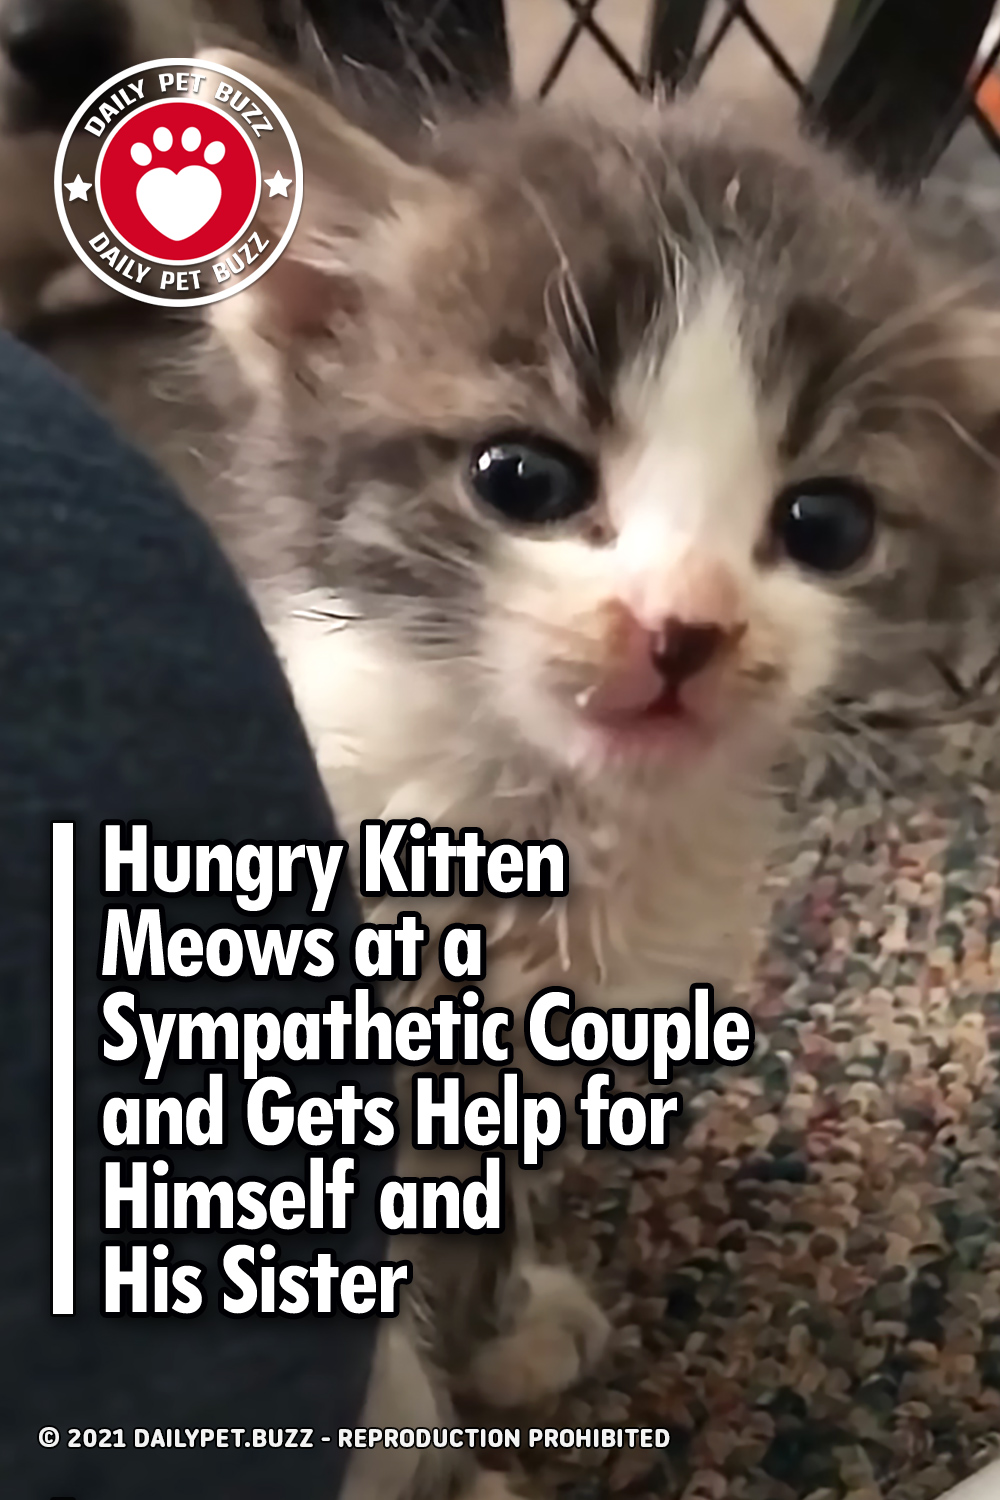 Hungry Kitten Meows at a Sympathetic Couple and Gets Help for Himself and His Sister